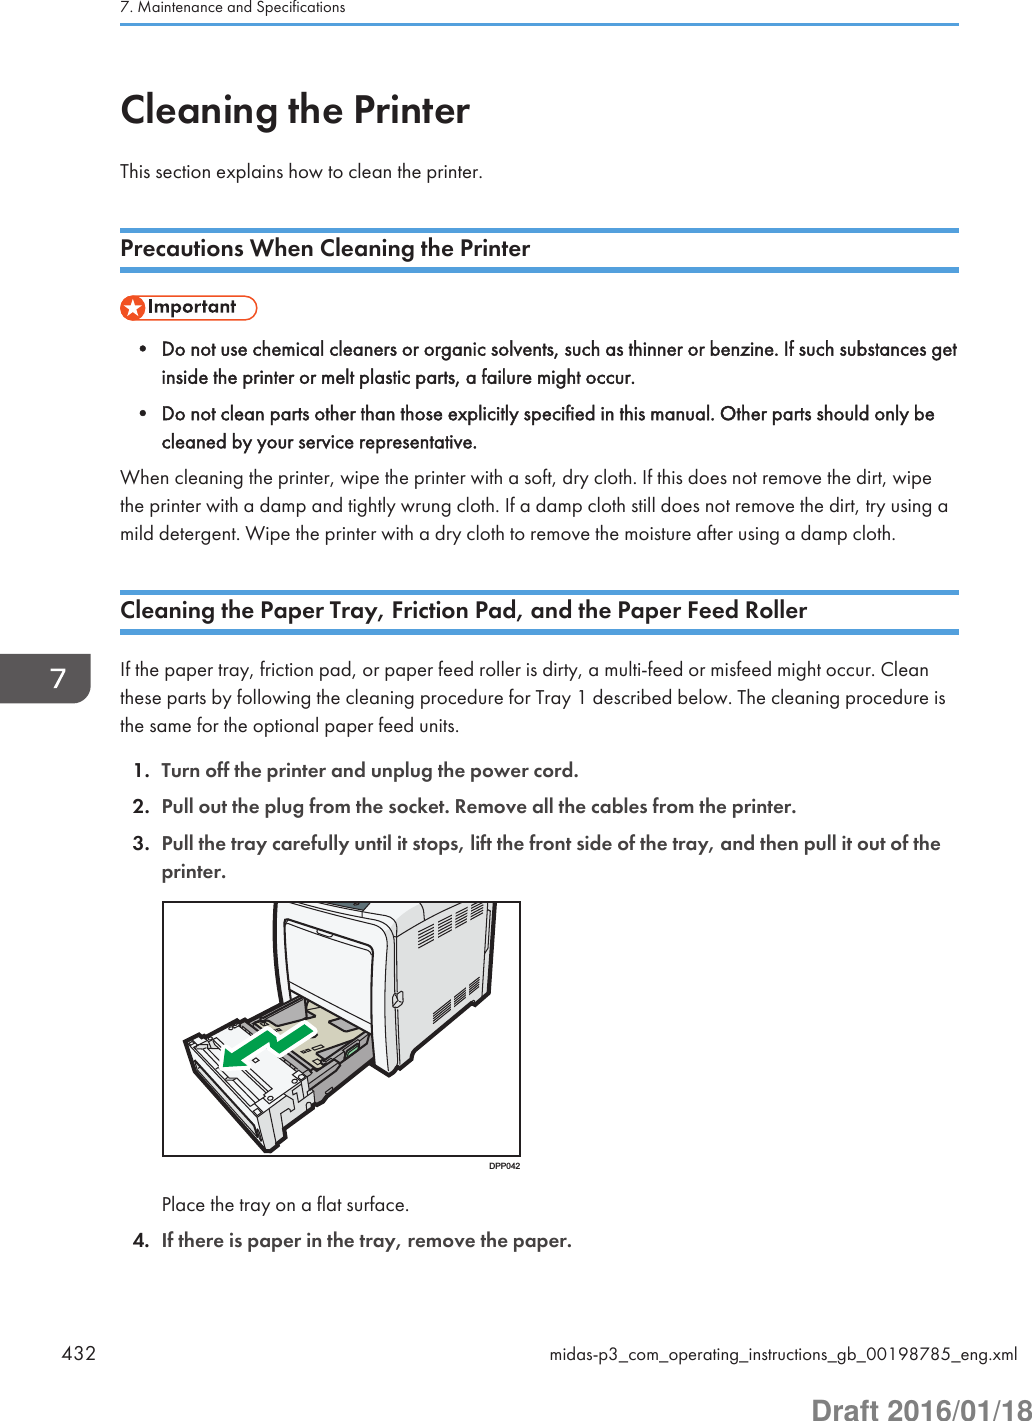 Cleaning the PrinterThis section explains how to clean the printer.Precautions When Cleaning the Printer• Do not use chemical cleaners or organic solvents, such as thinner or benzine. If such substances getinside the printer or melt plastic parts, a failure might occur.• Do not clean parts other than those explicitly specified in this manual. Other parts should only becleaned by your service representative.When cleaning the printer, wipe the printer with a soft, dry cloth. If this does not remove the dirt, wipethe printer with a damp and tightly wrung cloth. If a damp cloth still does not remove the dirt, try using amild detergent. Wipe the printer with a dry cloth to remove the moisture after using a damp cloth.Cleaning the Paper Tray, Friction Pad, and the Paper Feed RollerIf the paper tray, friction pad, or paper feed roller is dirty, a multi-feed or misfeed might occur. Cleanthese parts by following the cleaning procedure for Tray 1 described below. The cleaning procedure isthe same for the optional paper feed units.1. Turn off the printer and unplug the power cord.2. Pull out the plug from the socket. Remove all the cables from the printer.3. Pull the tray carefully until it stops, lift the front side of the tray, and then pull it out of theprinter.DPP042Place the tray on a flat surface.4. If there is paper in the tray, remove the paper.7. Maintenance and Specifications432 midas-p3_com_operating_instructions_gb_00198785_eng.xmlDraft 2016/01/18